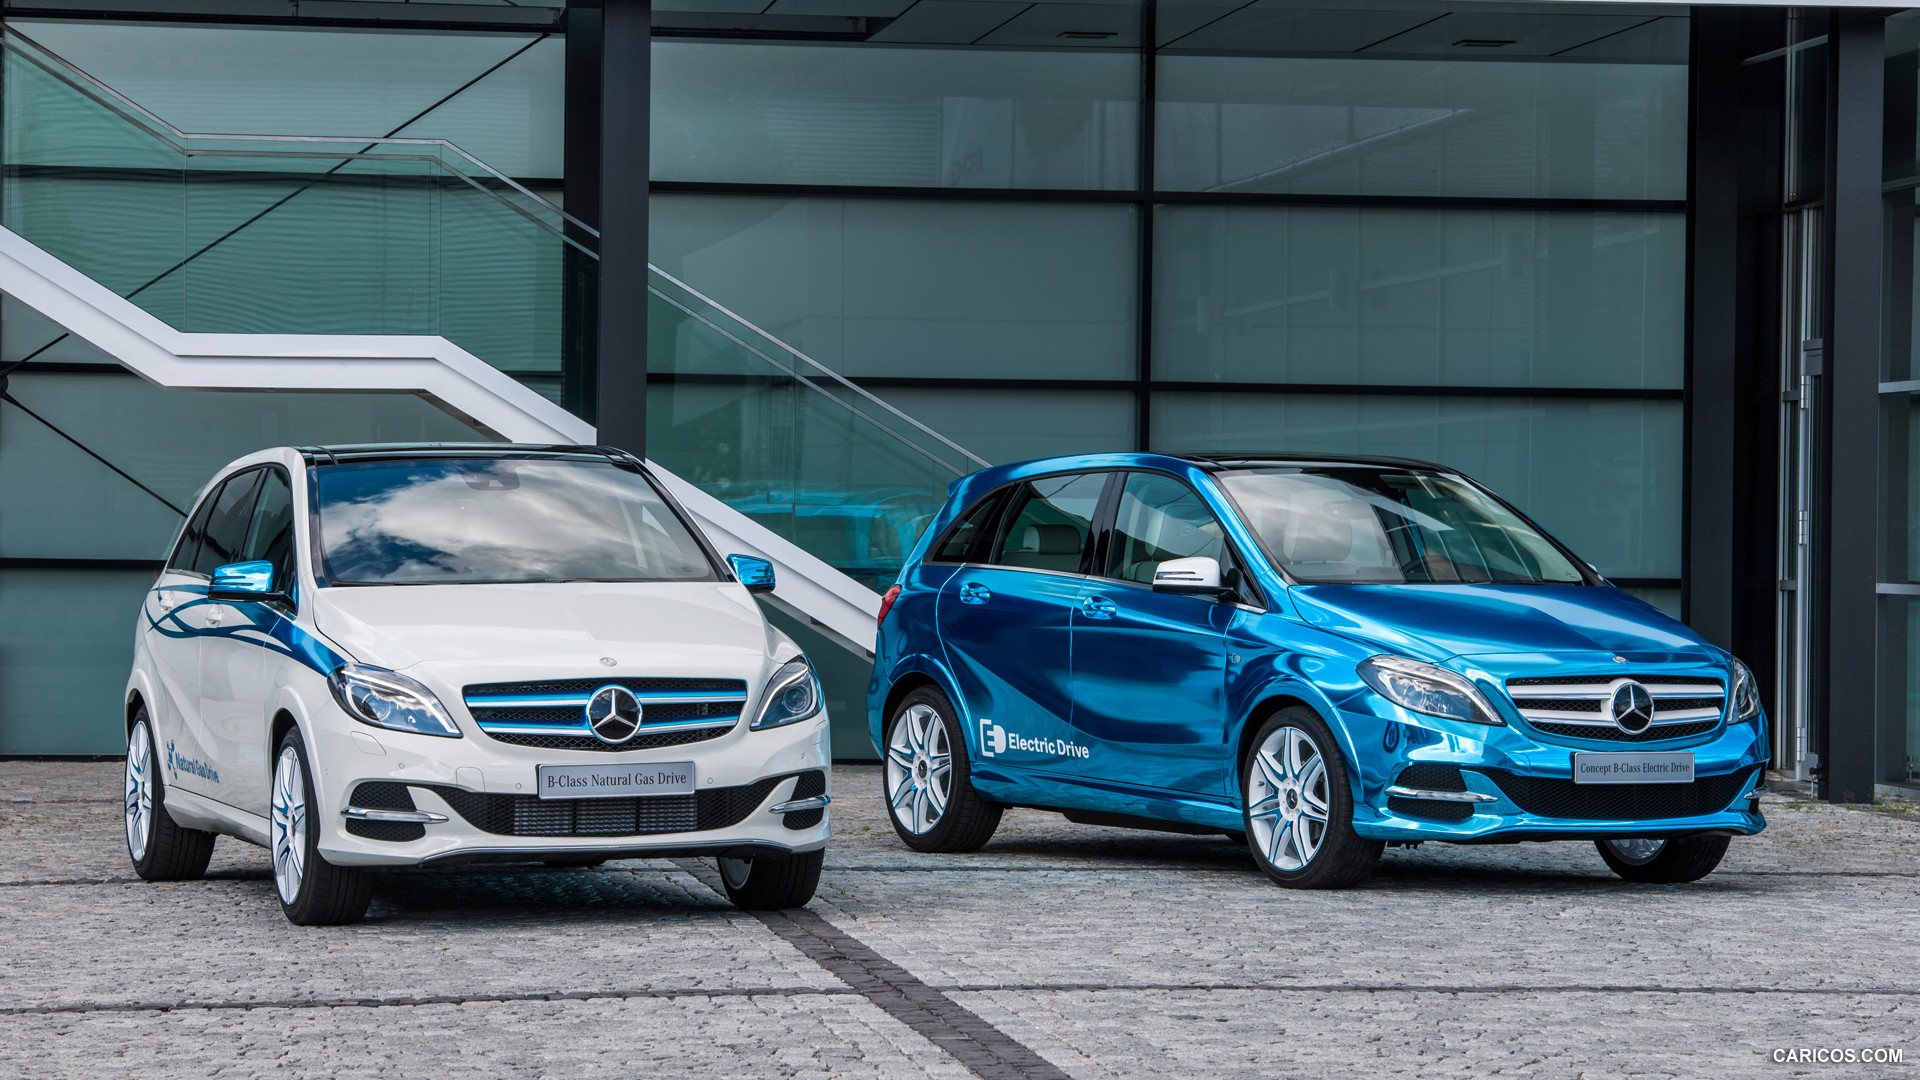 2012 Mercedes-Benz B-Class Electric Drive Concept and B 200 Natural Gas Drive - , #5 of 18